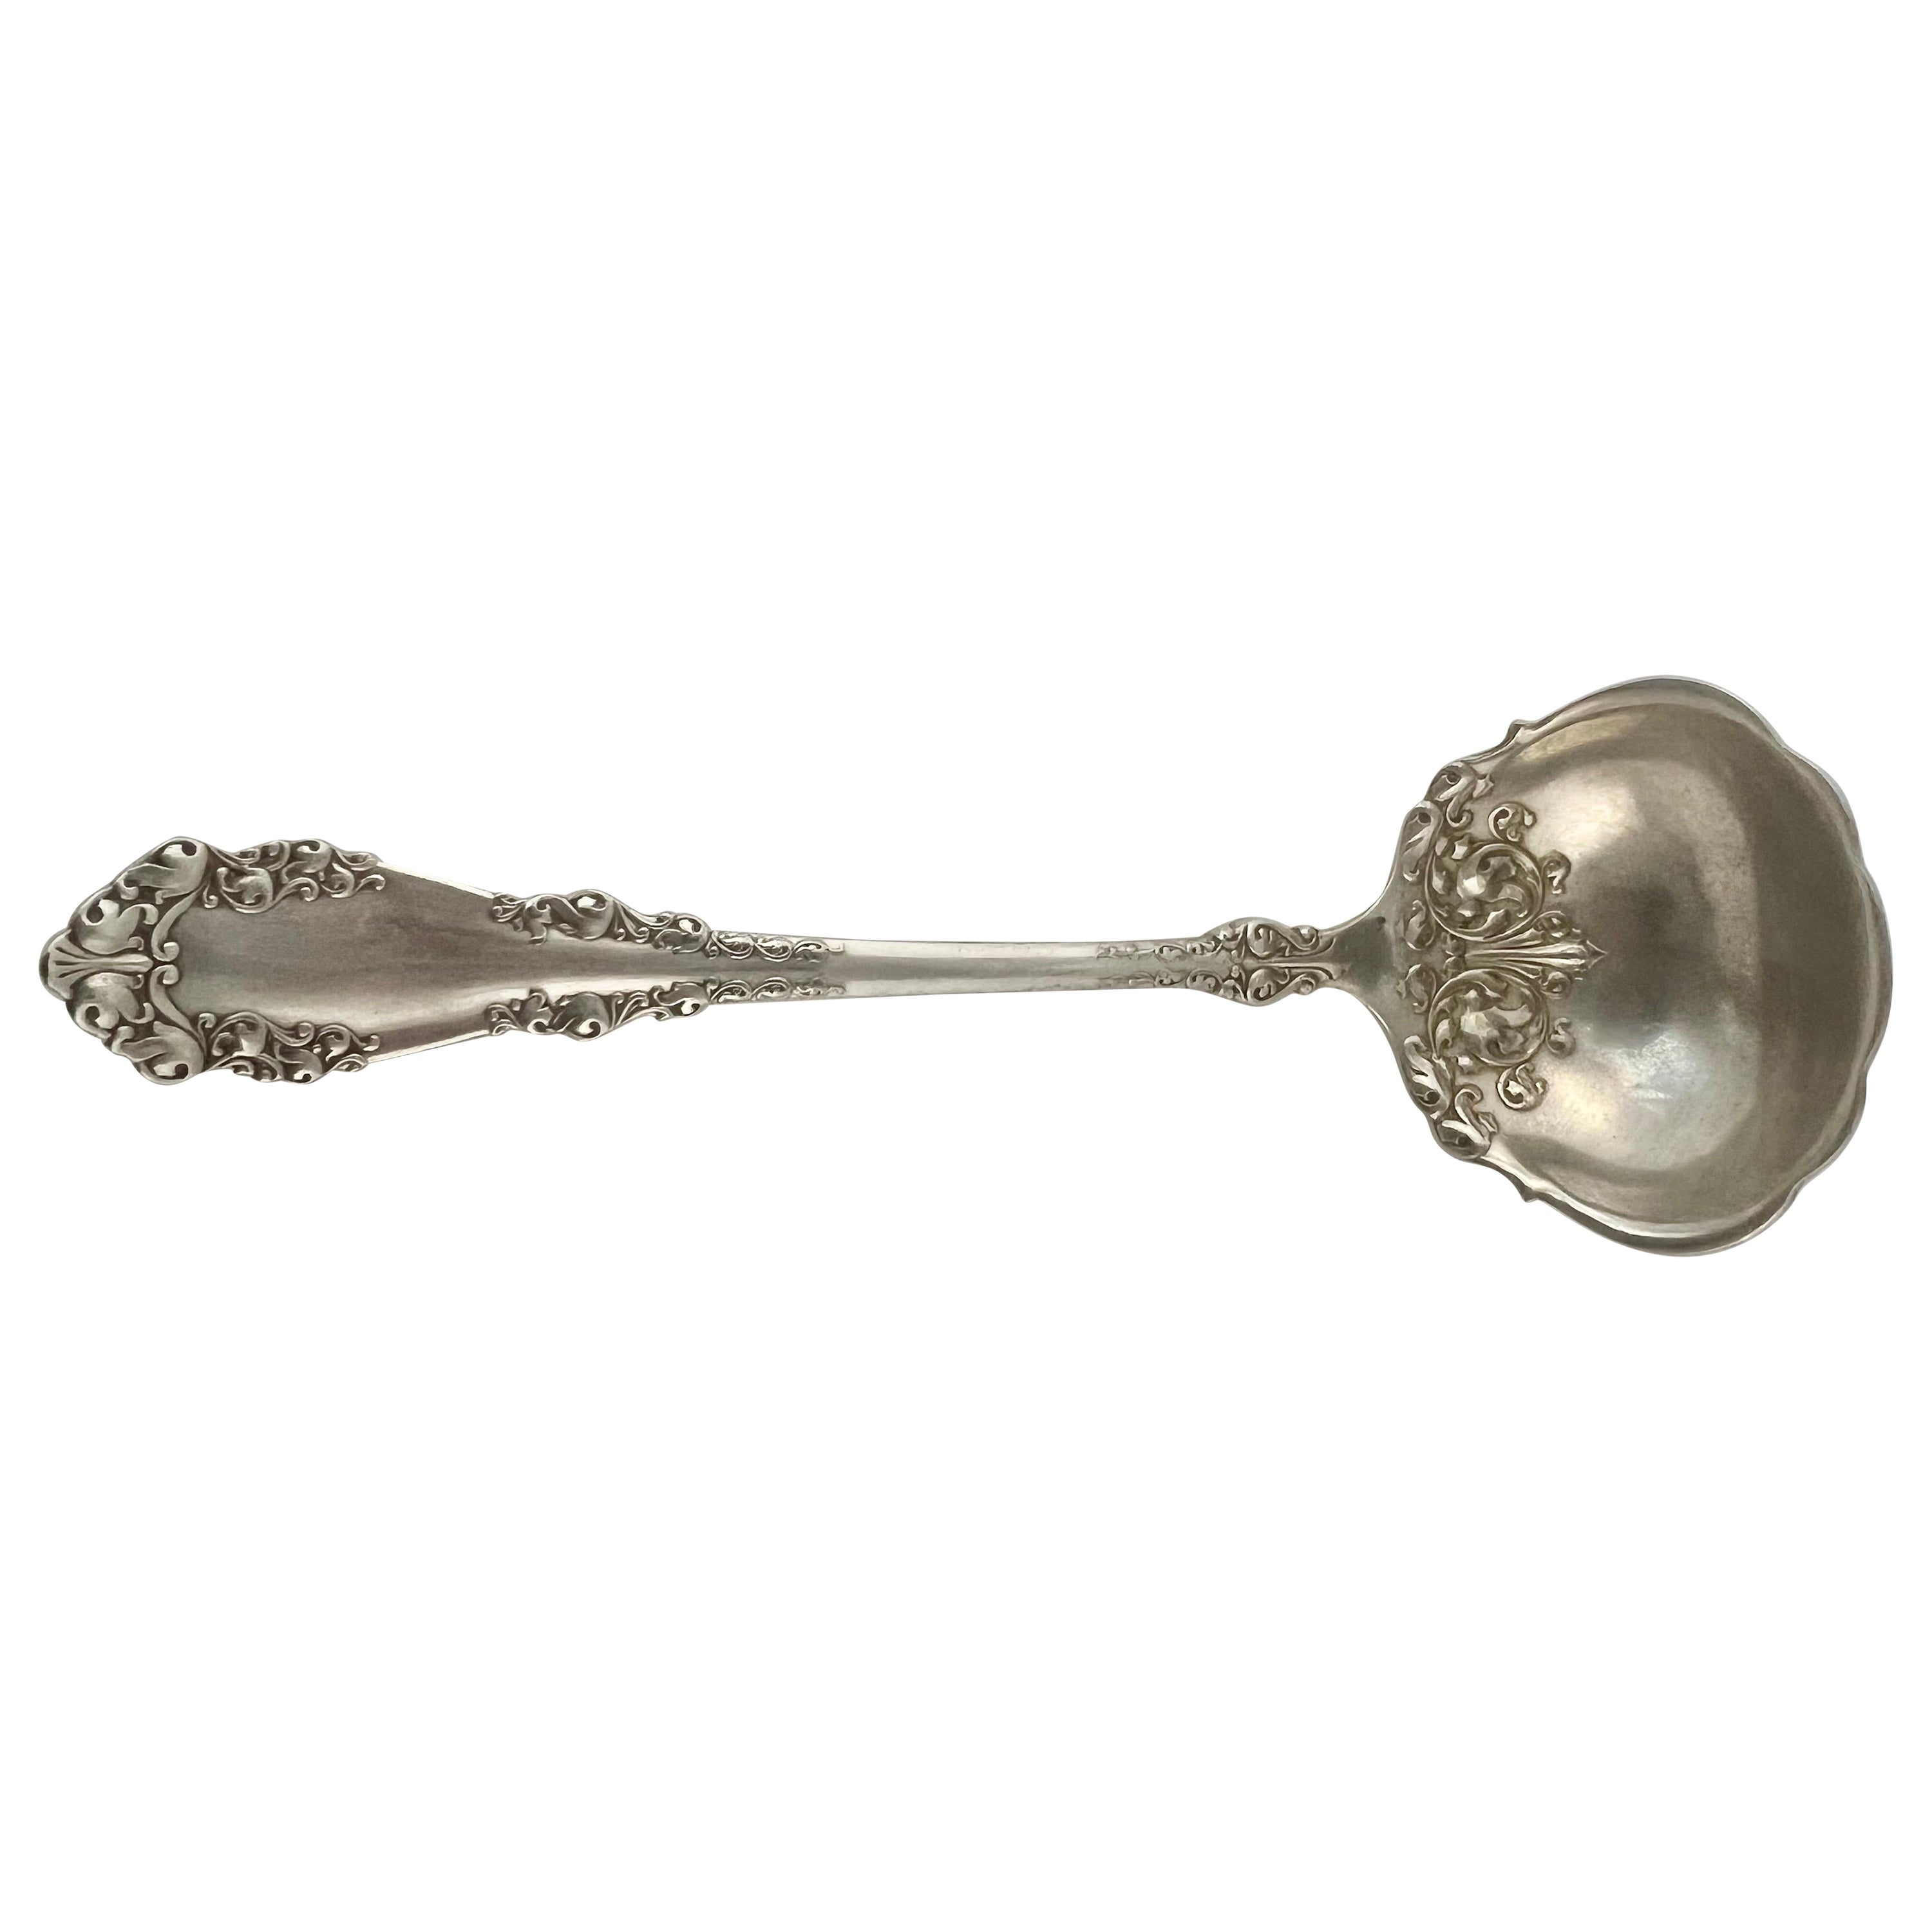 1847 Rogers Bros. Silver Serving Spoon For Sale